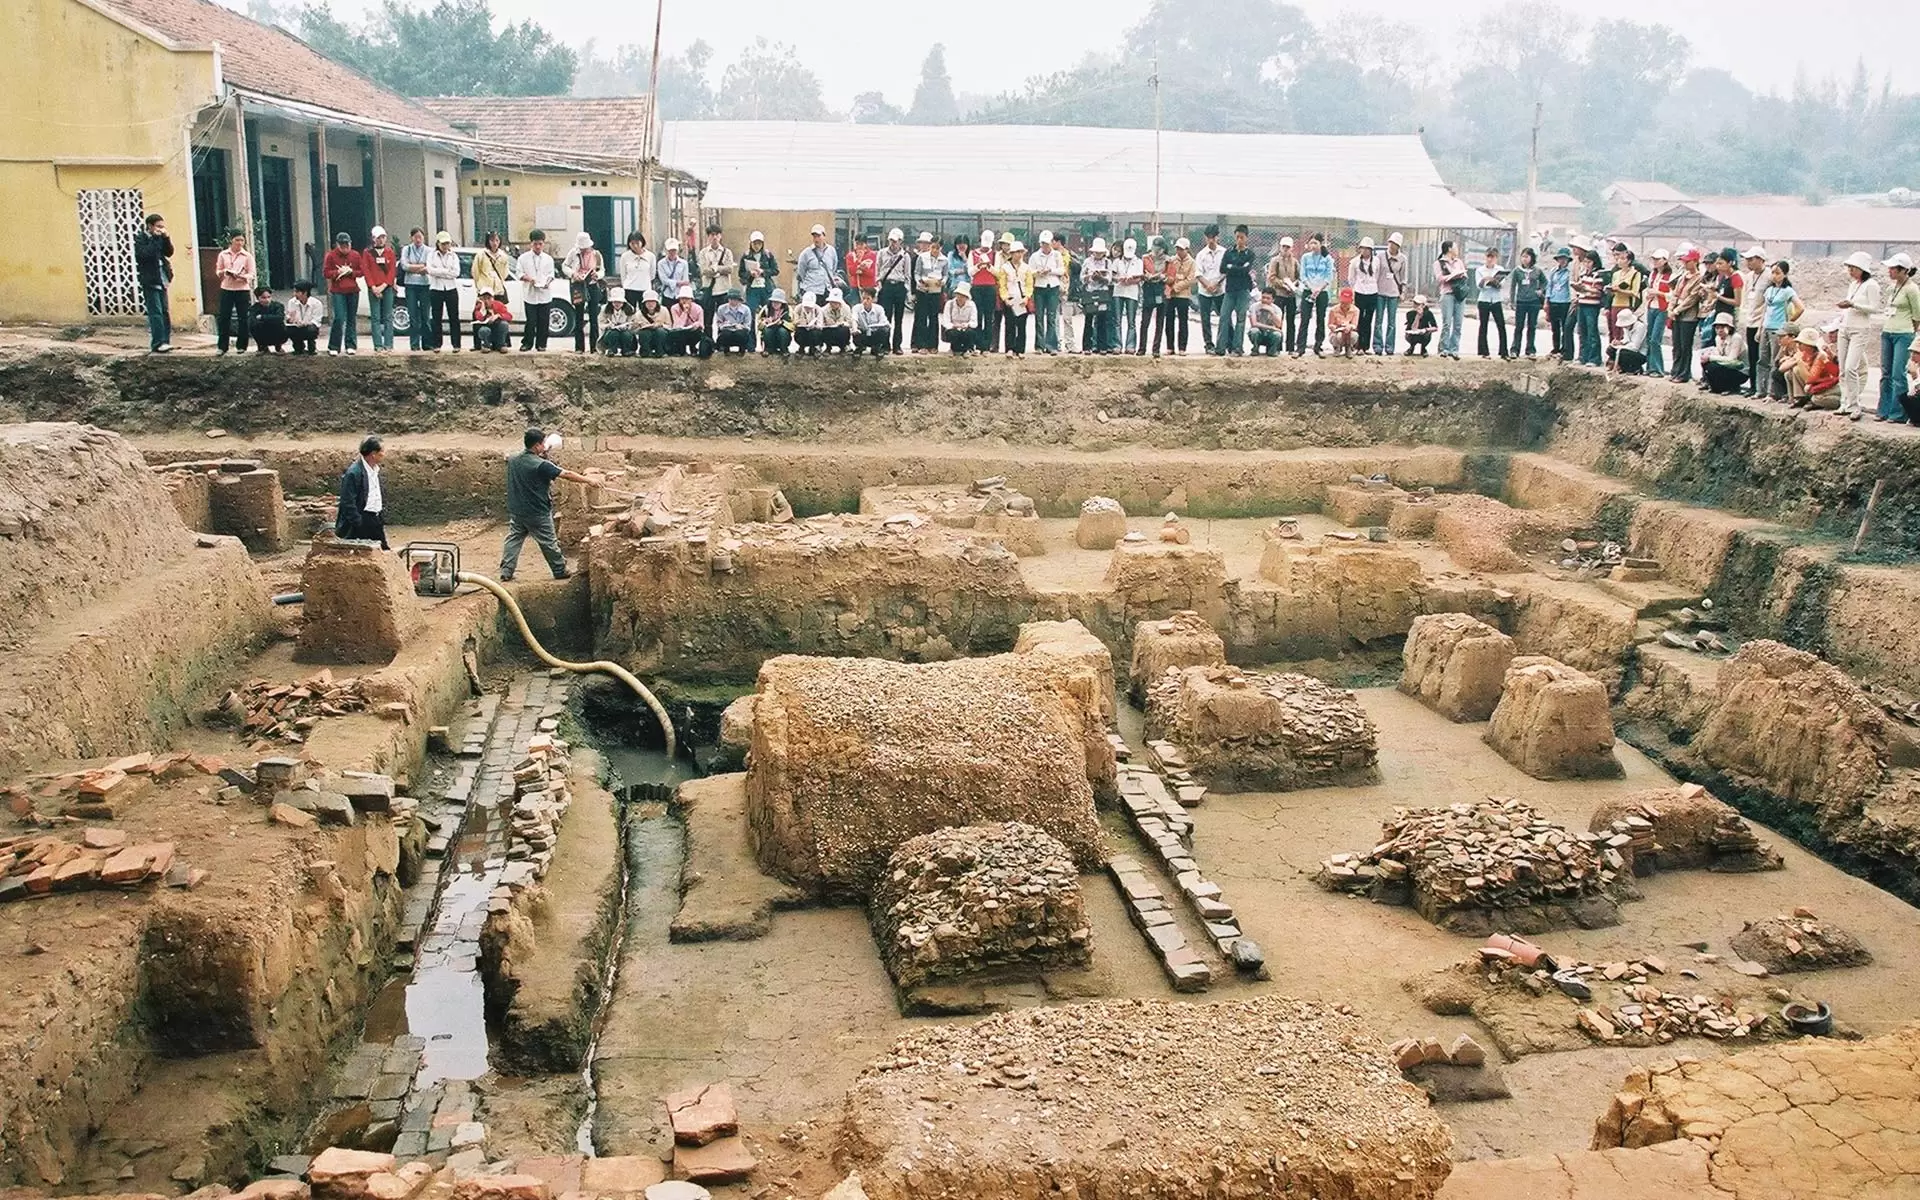 The archaeological site at 18 Hoang Dieu Street